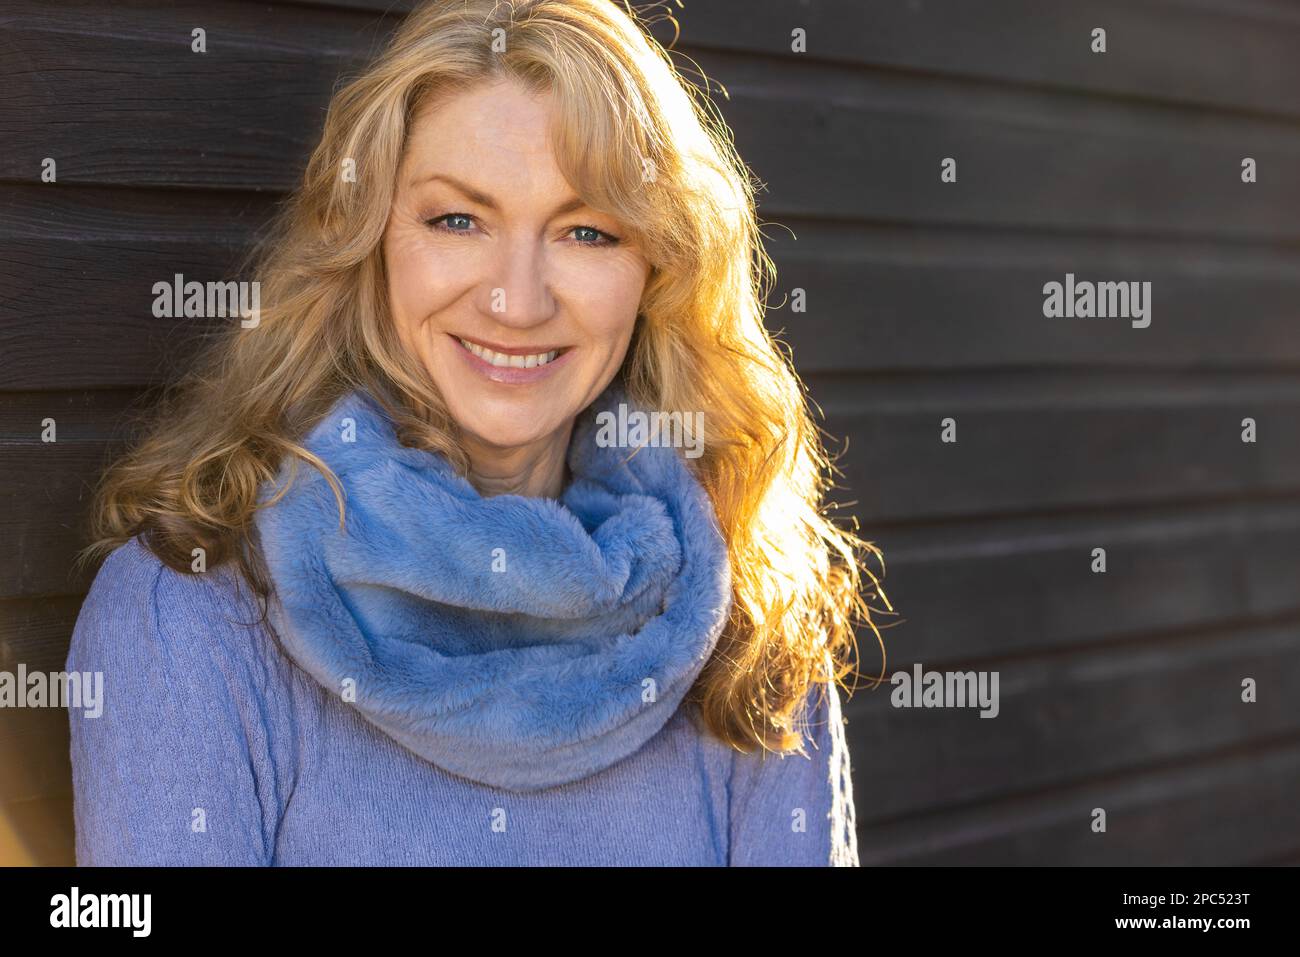 Attractive happy smiling middle aged woman outside in warm sunshine at sunset or sunrise Stock Photo